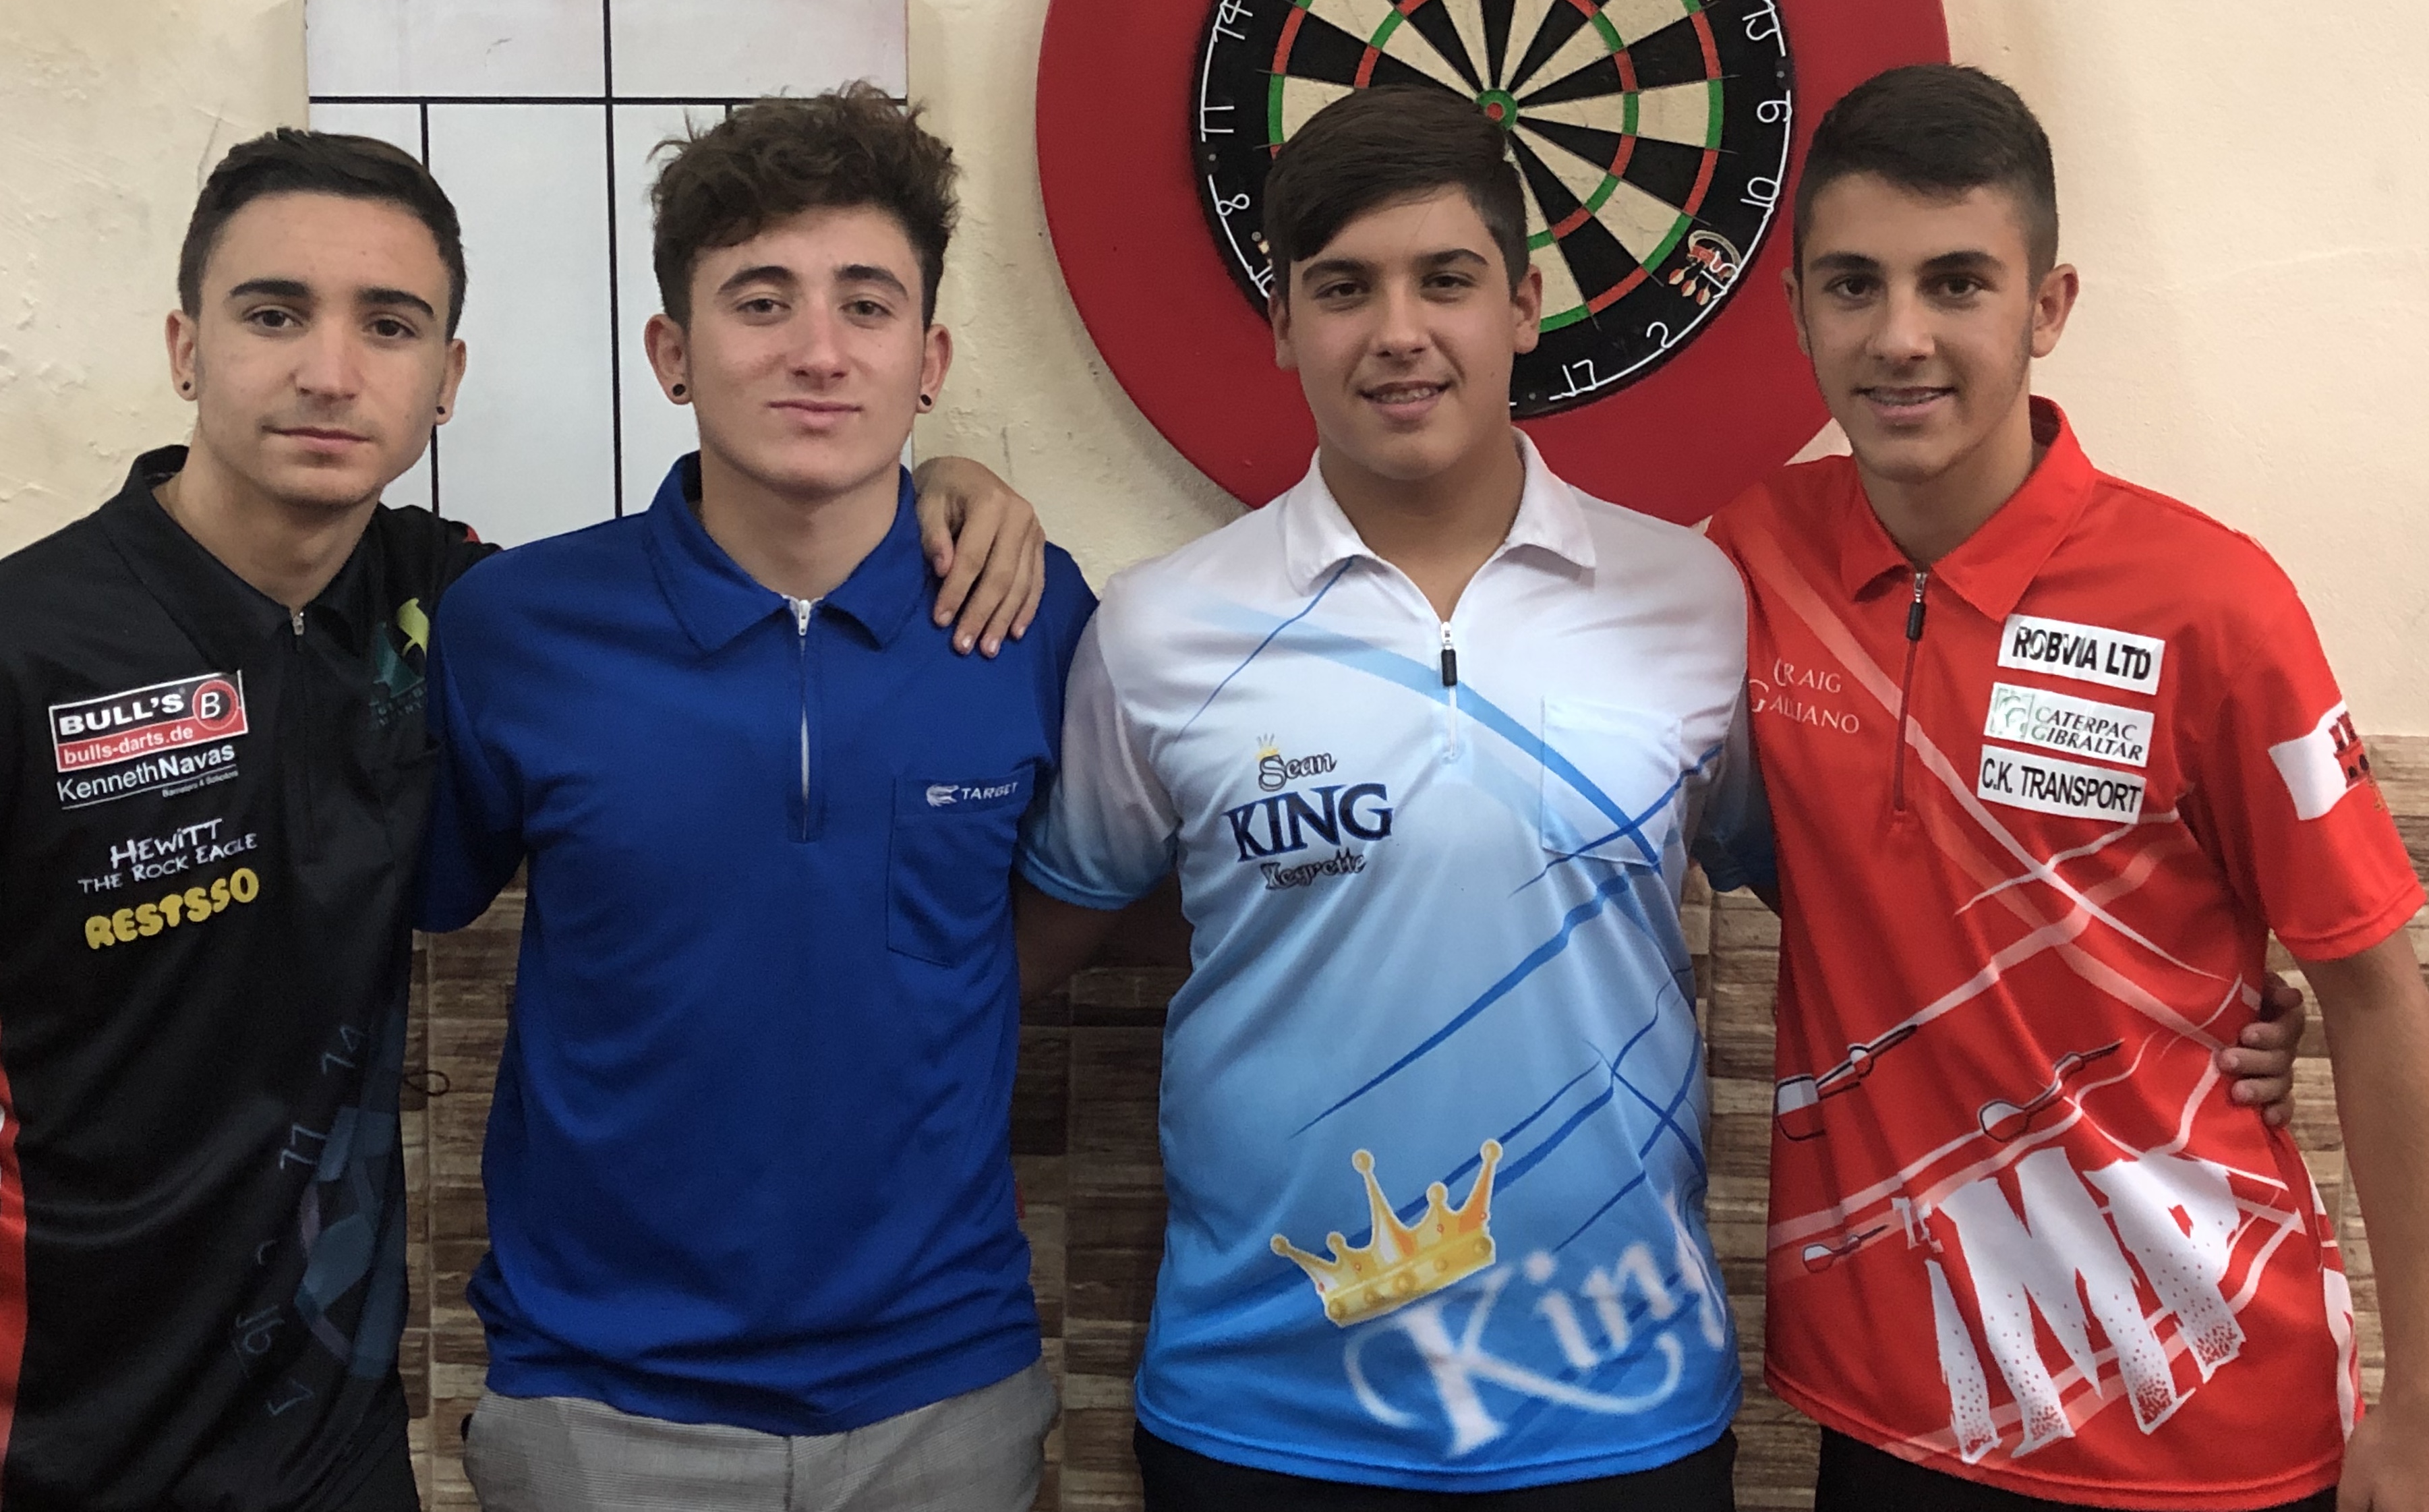 Sean Negrette claims the first ranking title the 2018/19 youth season! – Gibraltar Darts